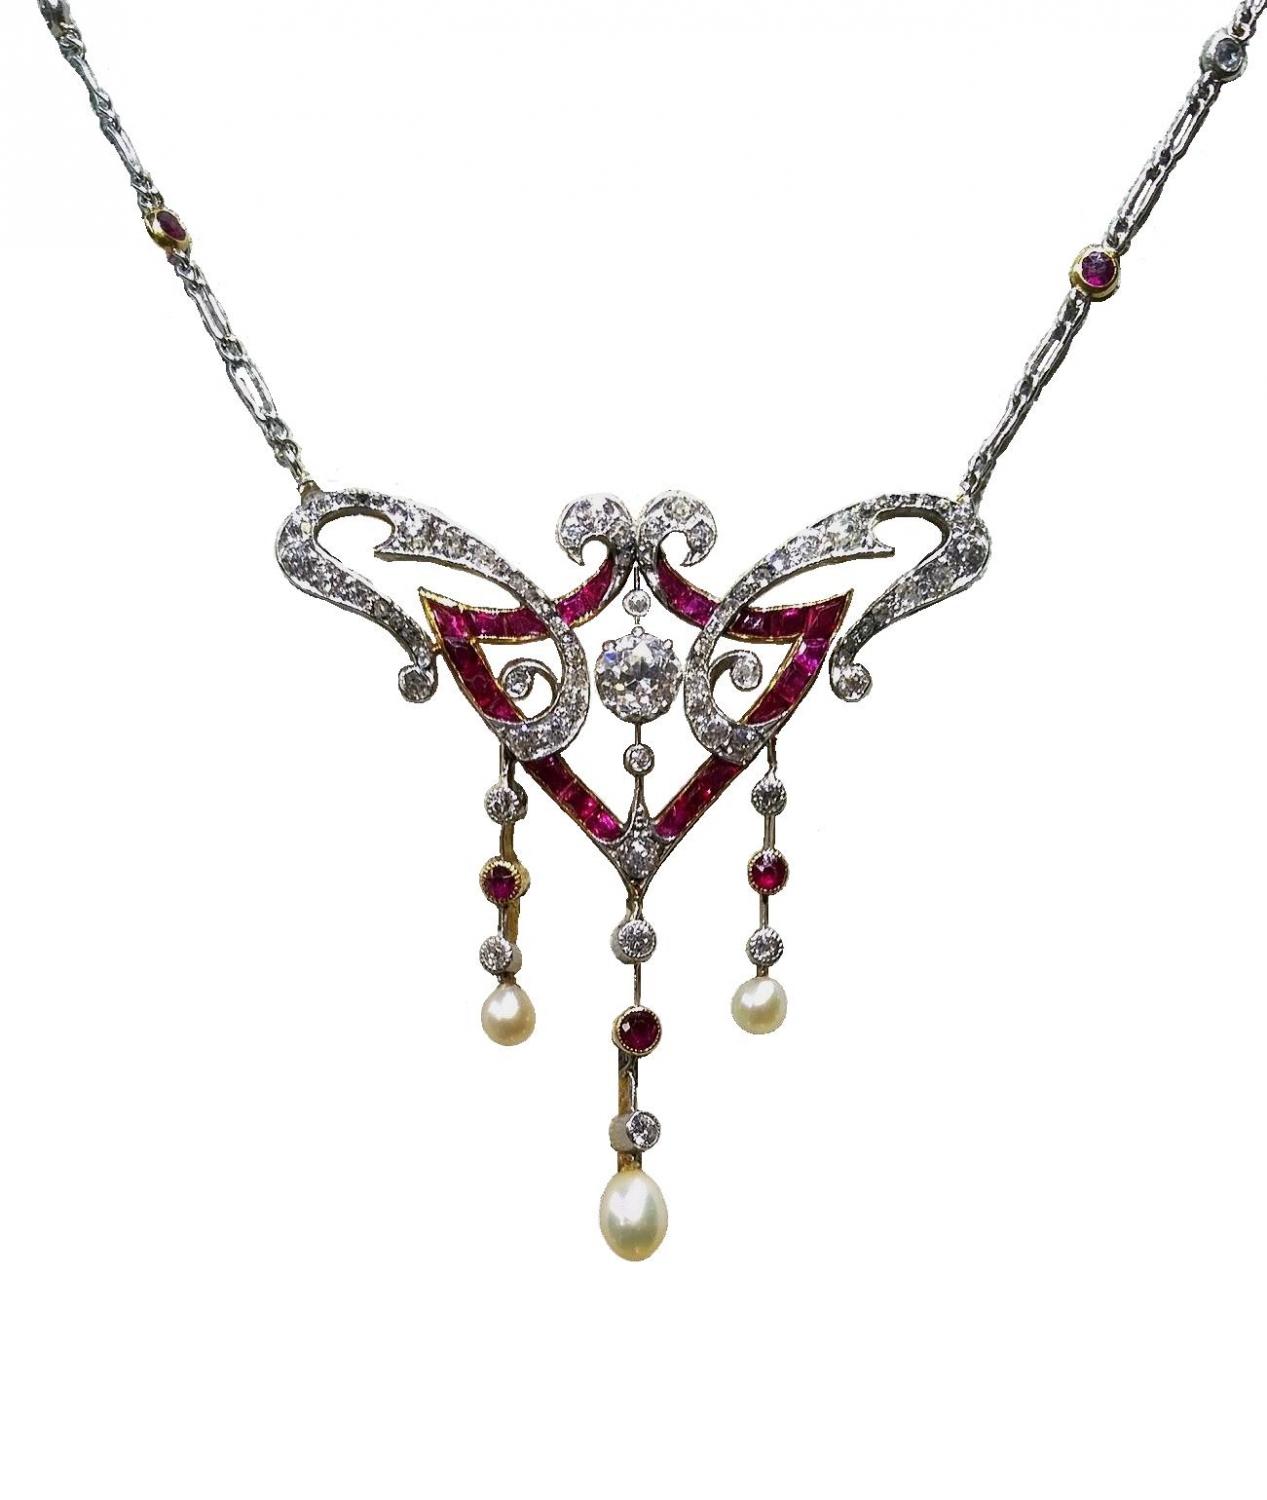 Antique Ruby And Diamond Necklace